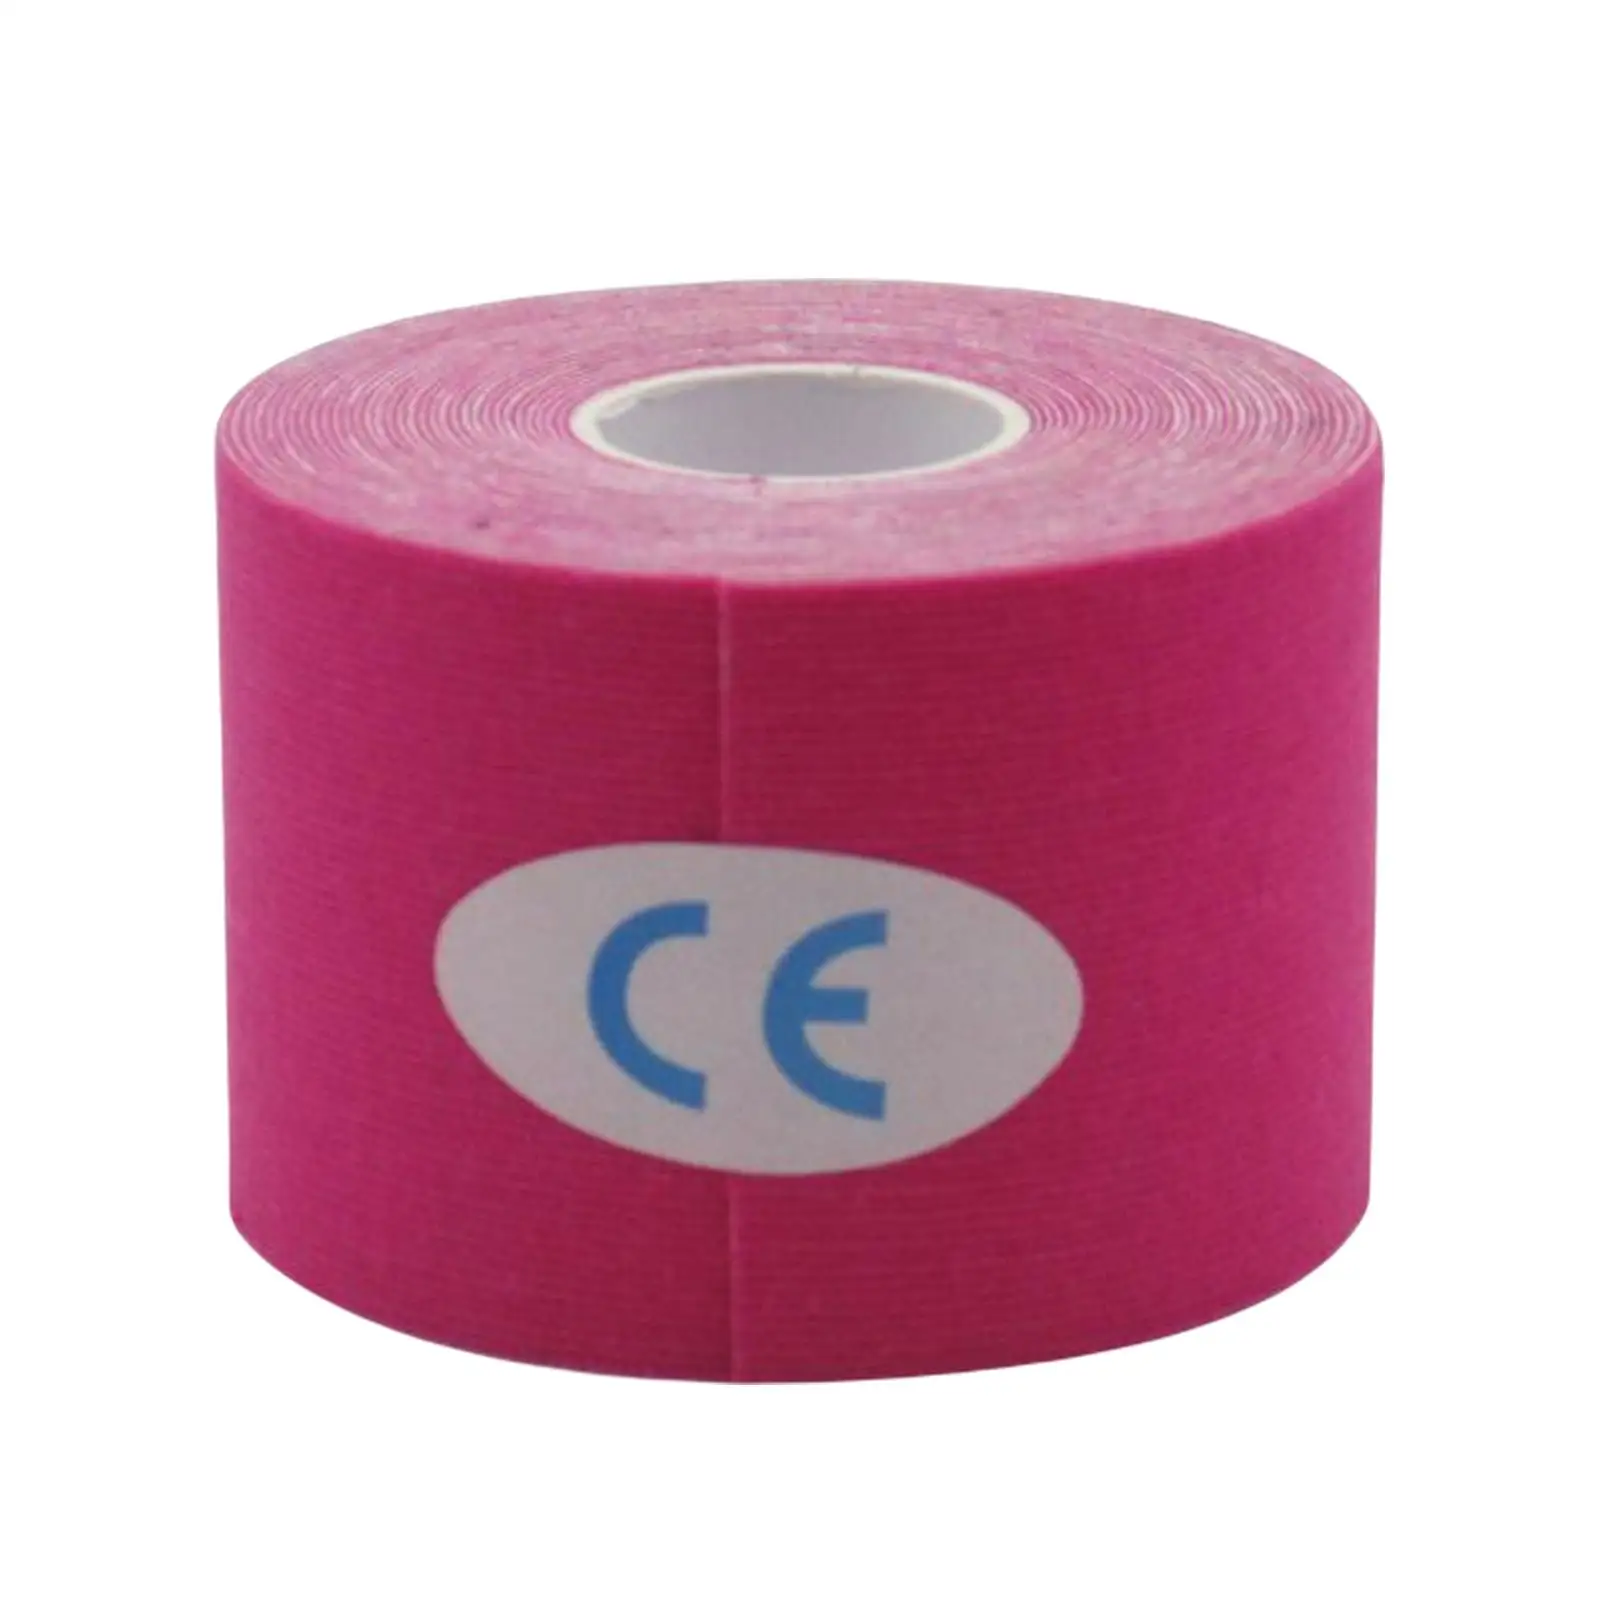 5M Tape for Sports Protective Tape Athletic Tape for Knee Shoulder Gym